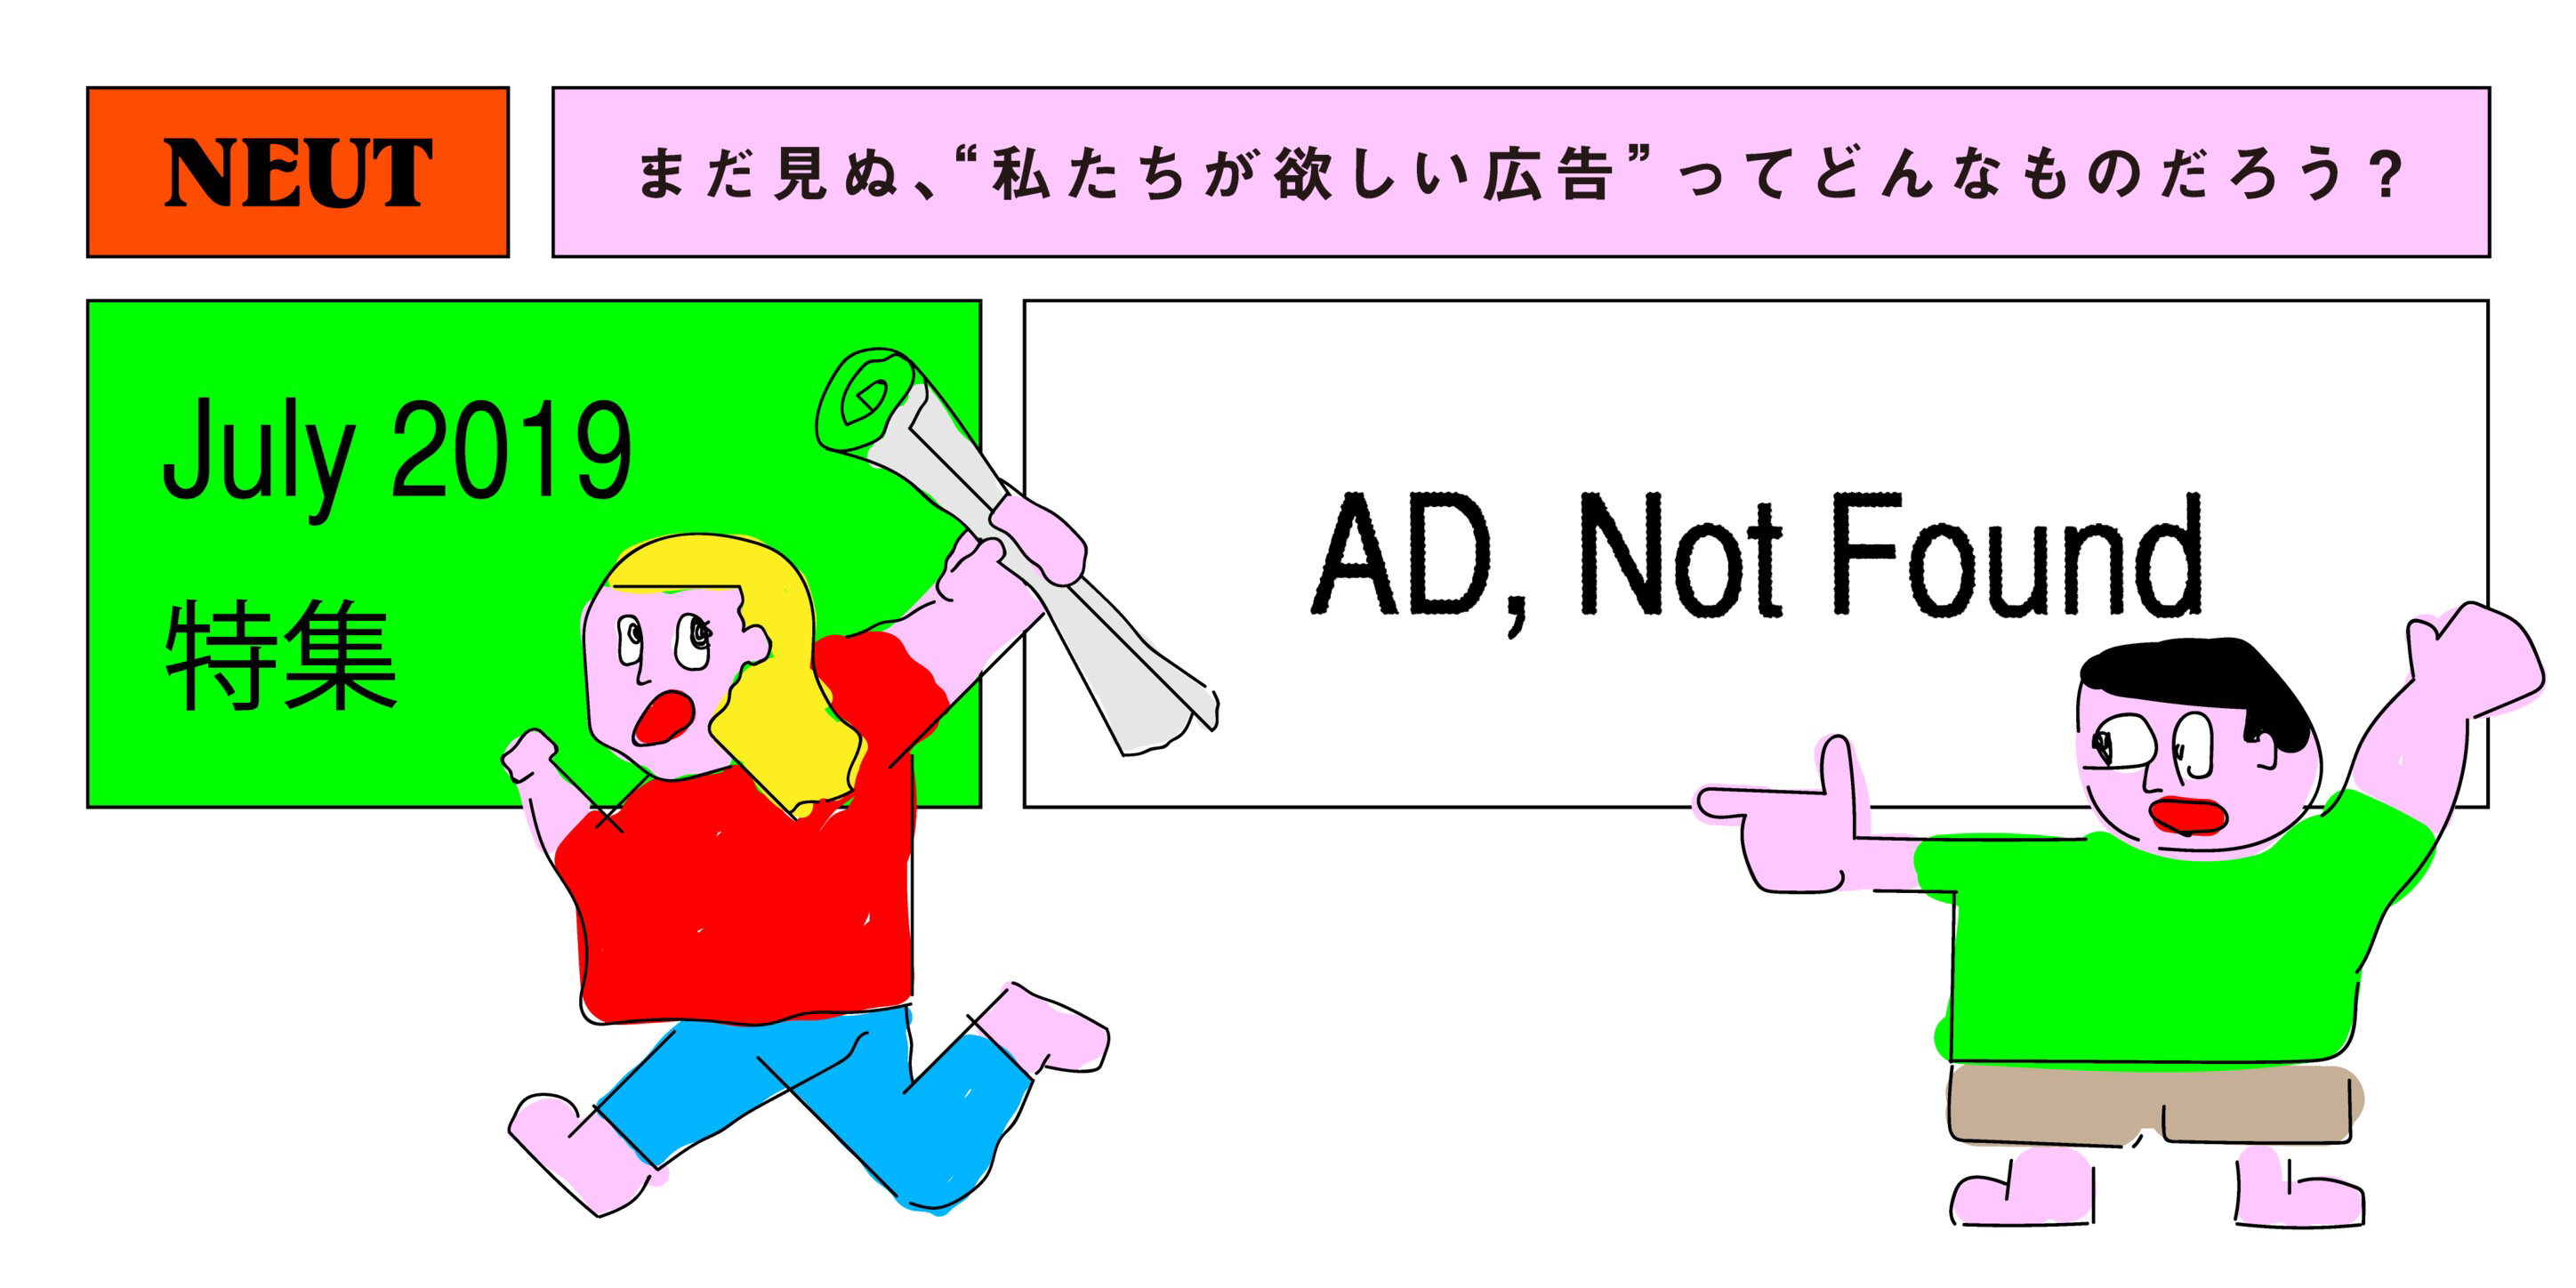 Ad, Not found